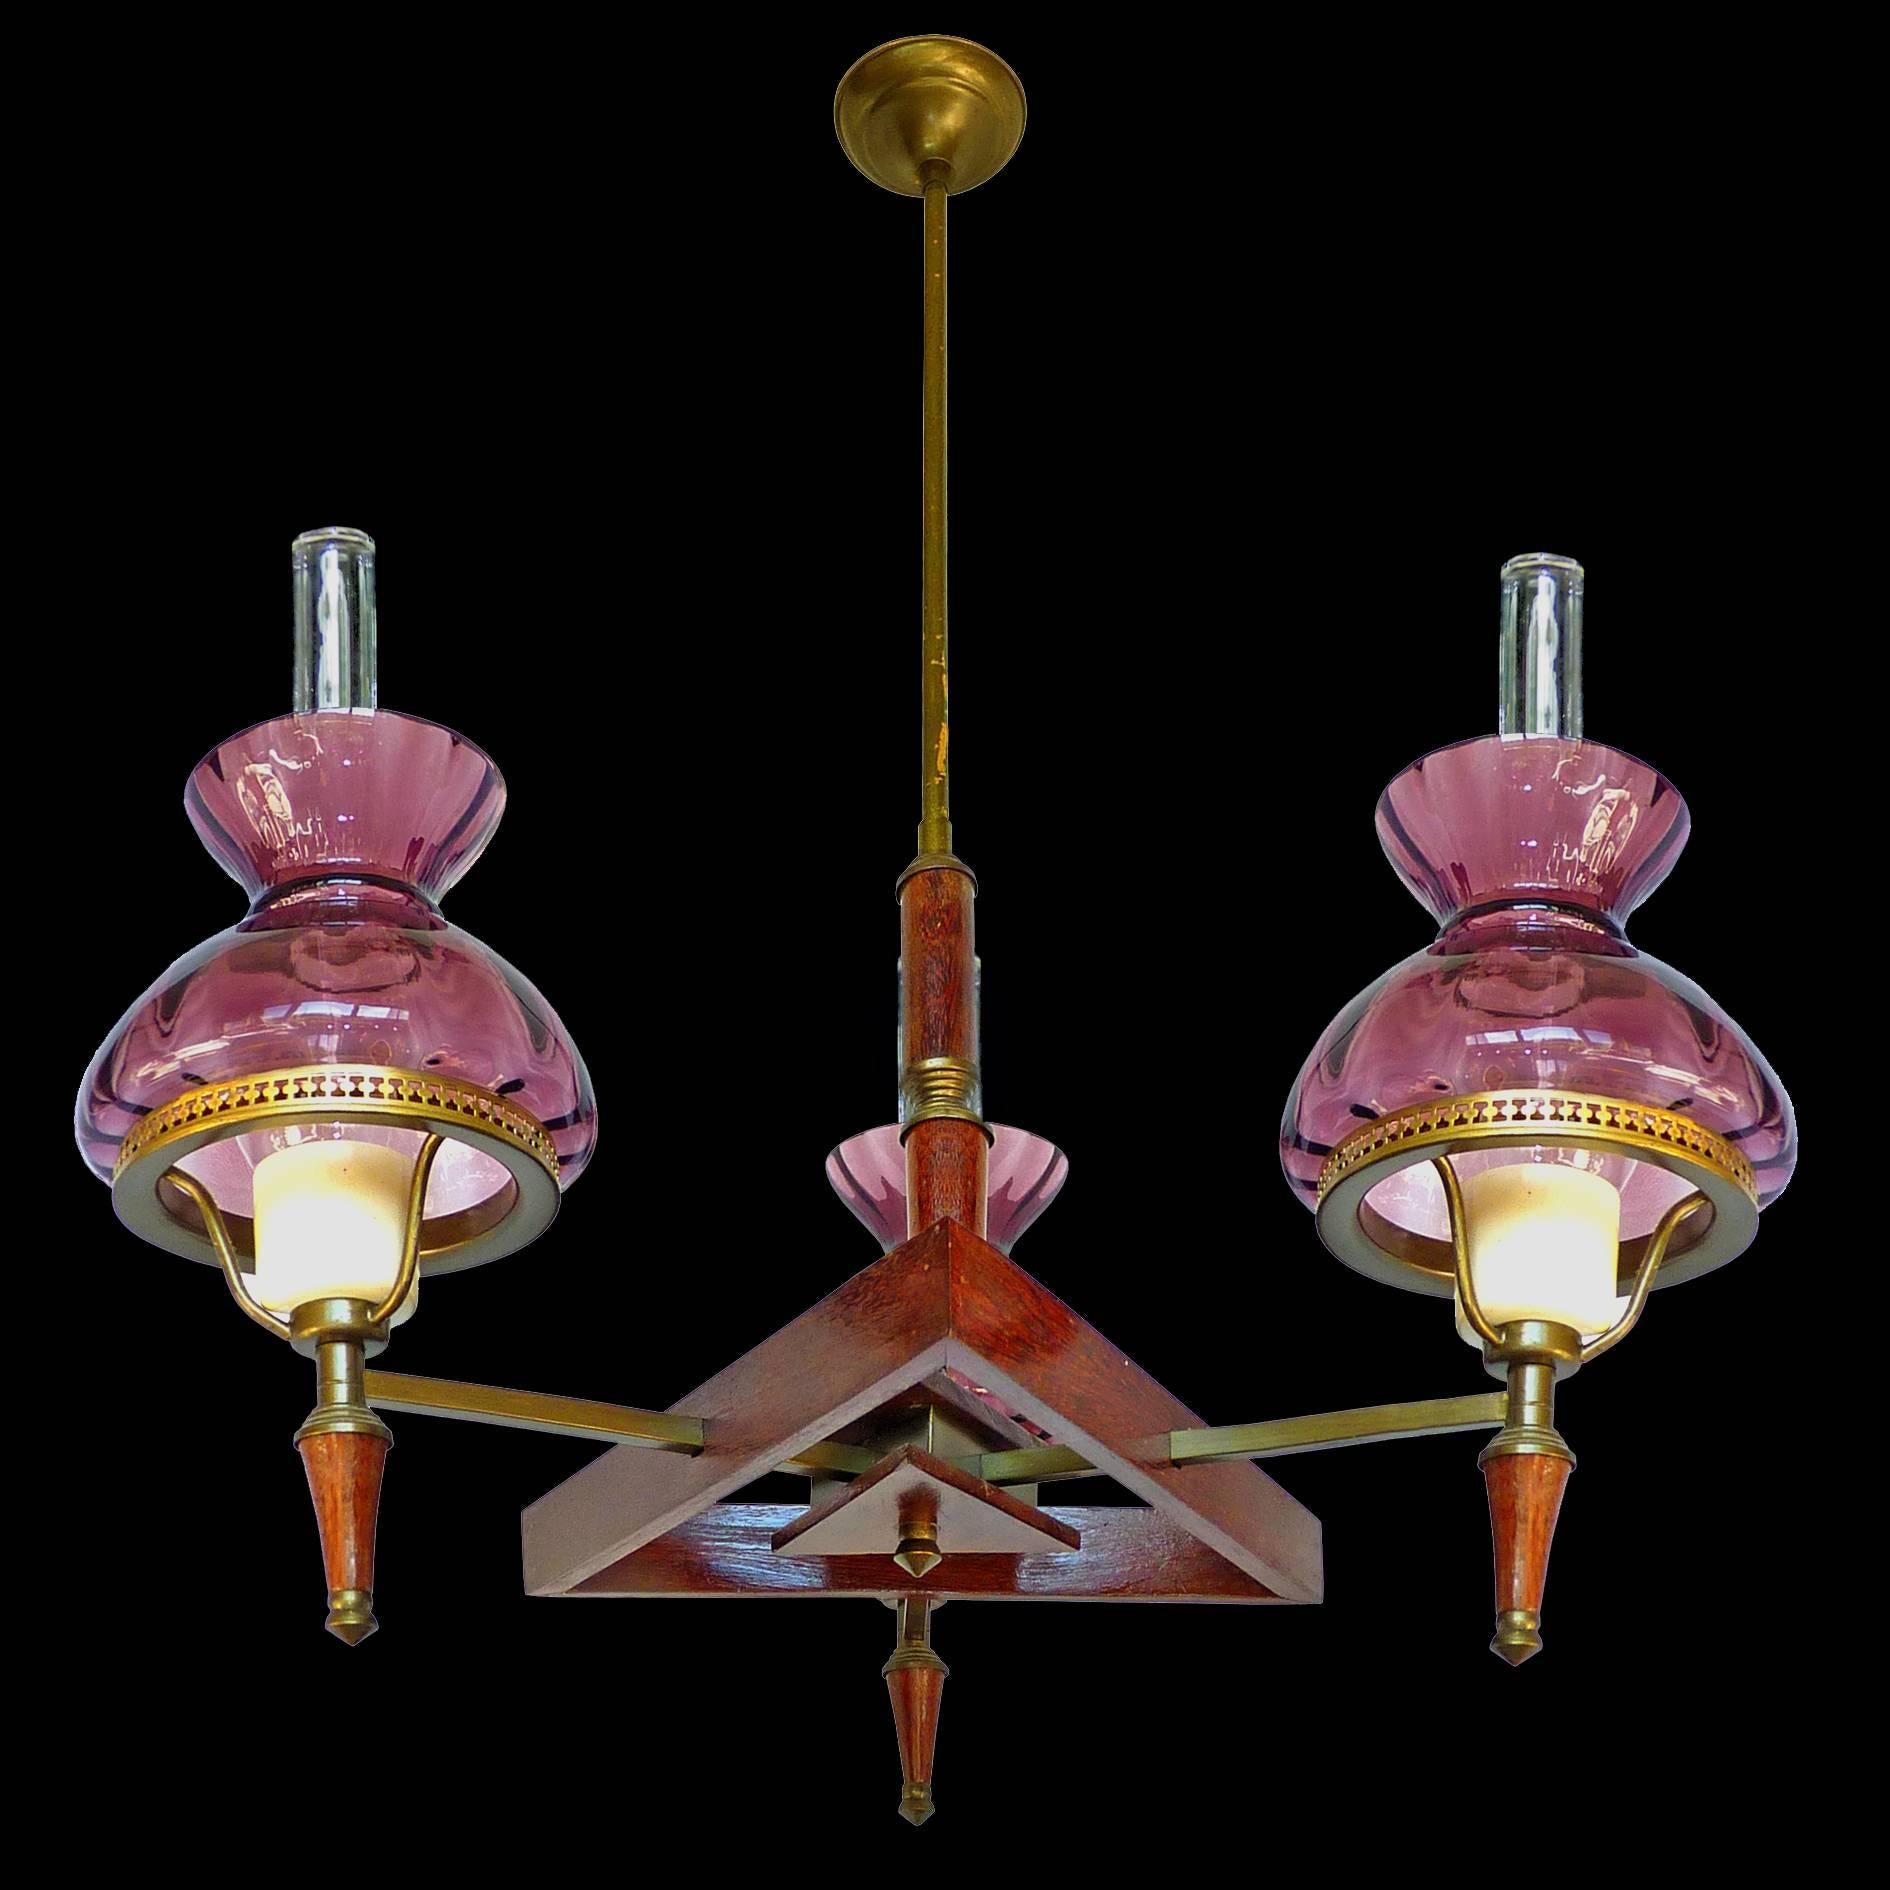 Mid-20th Century French Art Deco Purple, Plum, Amethyst Glass Shades Wood and Brass Chandelier For Sale